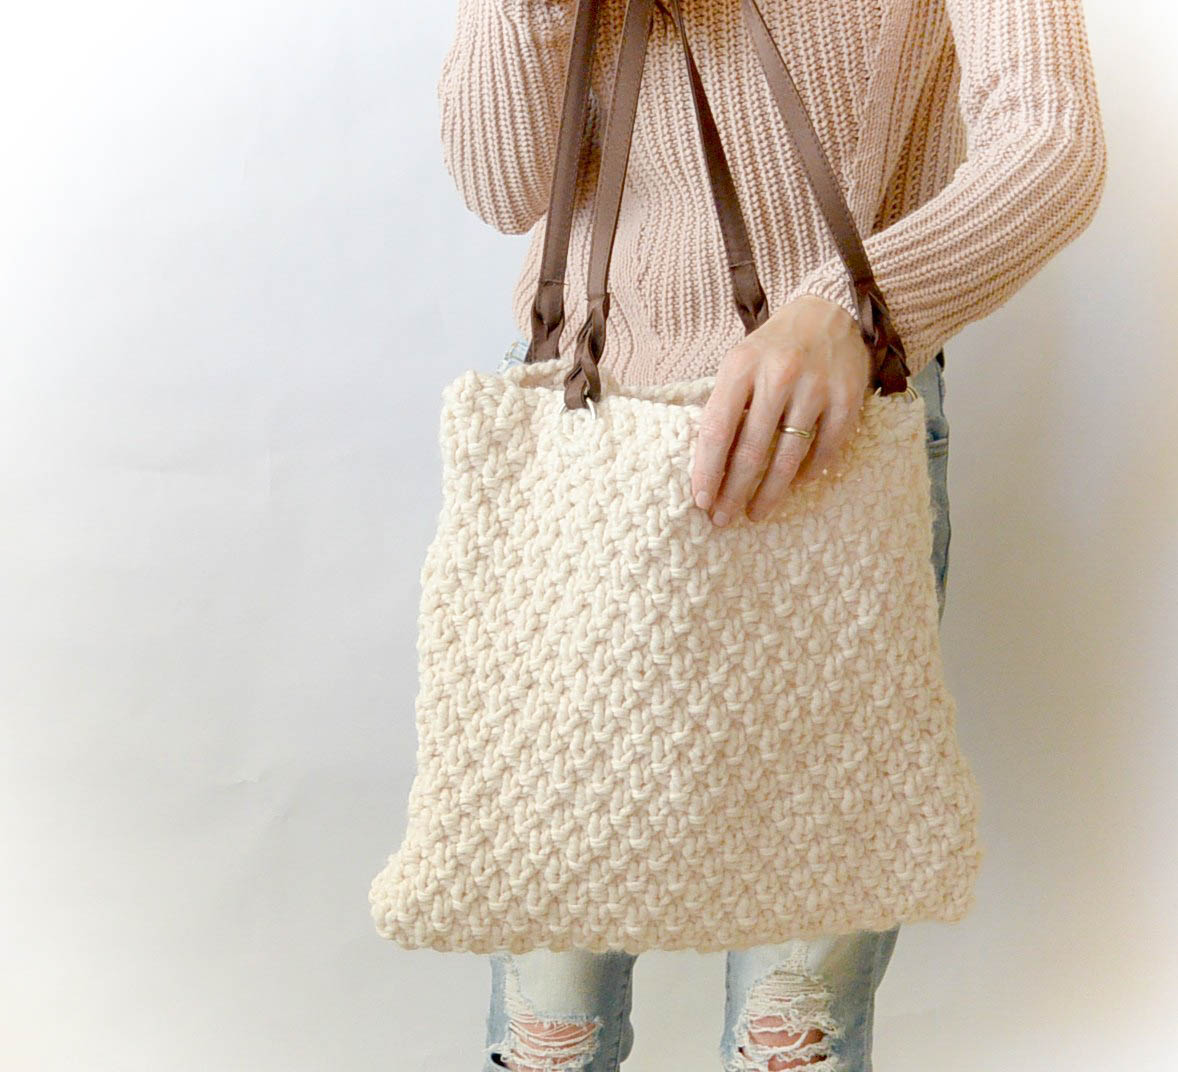 12 Great Bags to Knit Right Now with FREE Knitting Patterns 